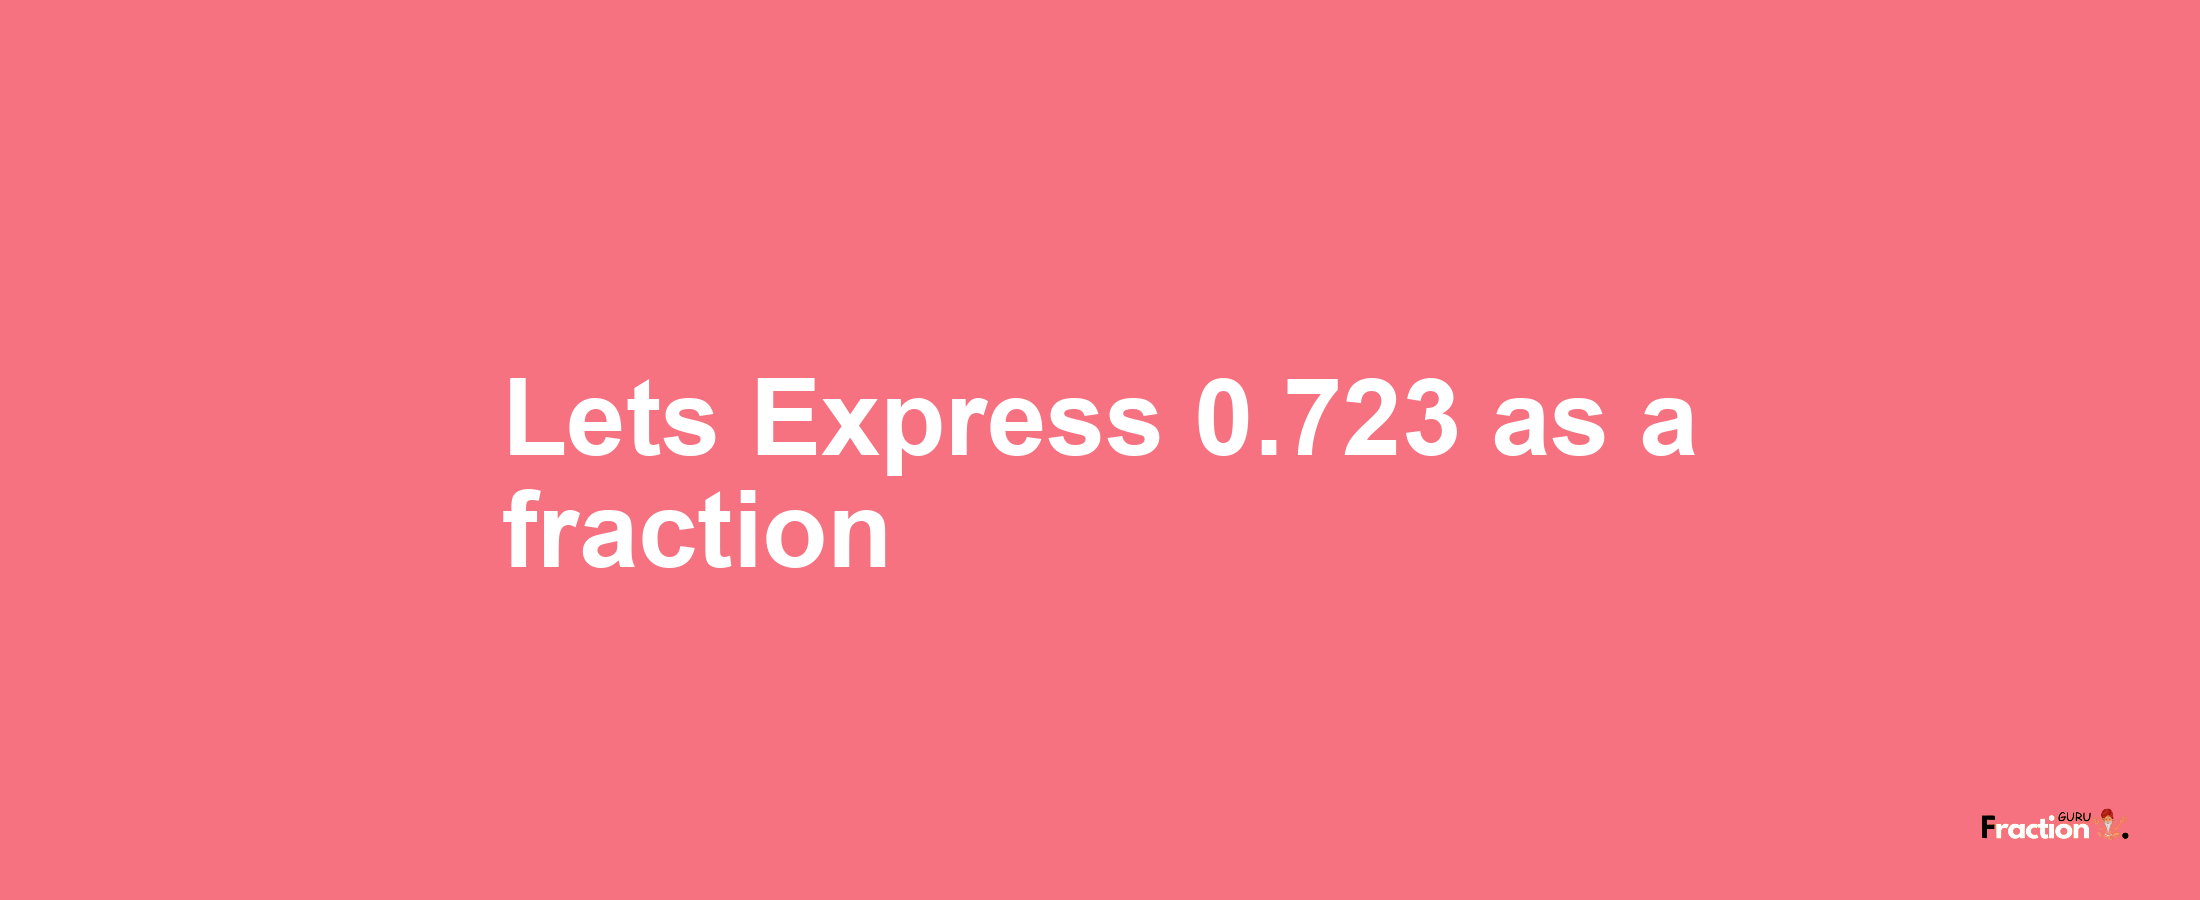 Lets Express 0.723 as afraction